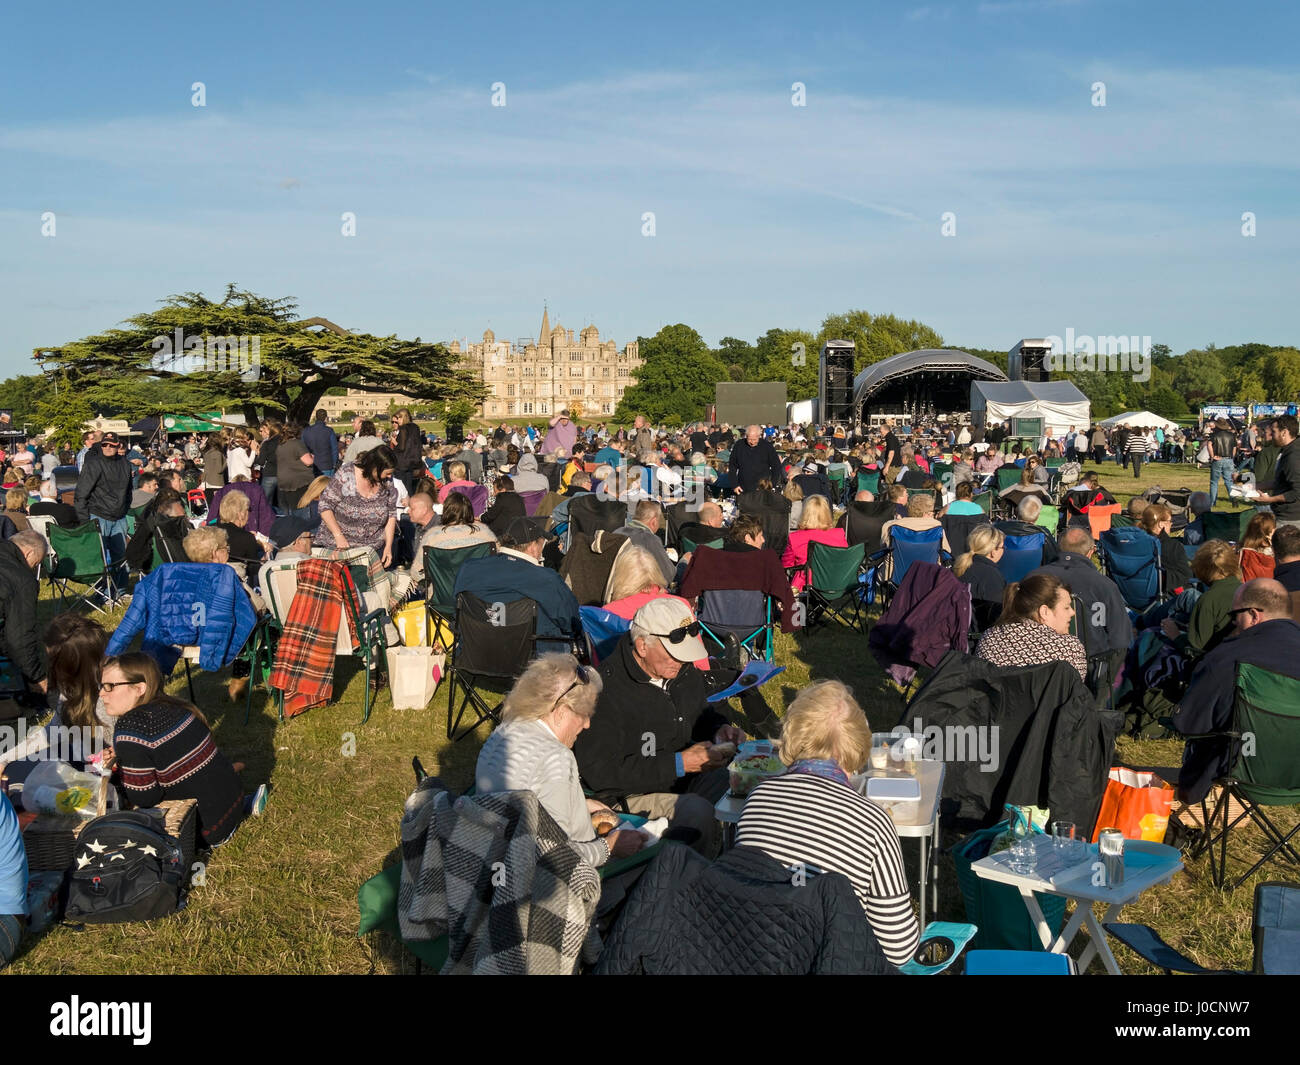 Audience waiting for outdoor Status Quo rock concert at Burghley House Park in Summer 2015, Stamford, Lincolnshire, England, UK Stock Photo